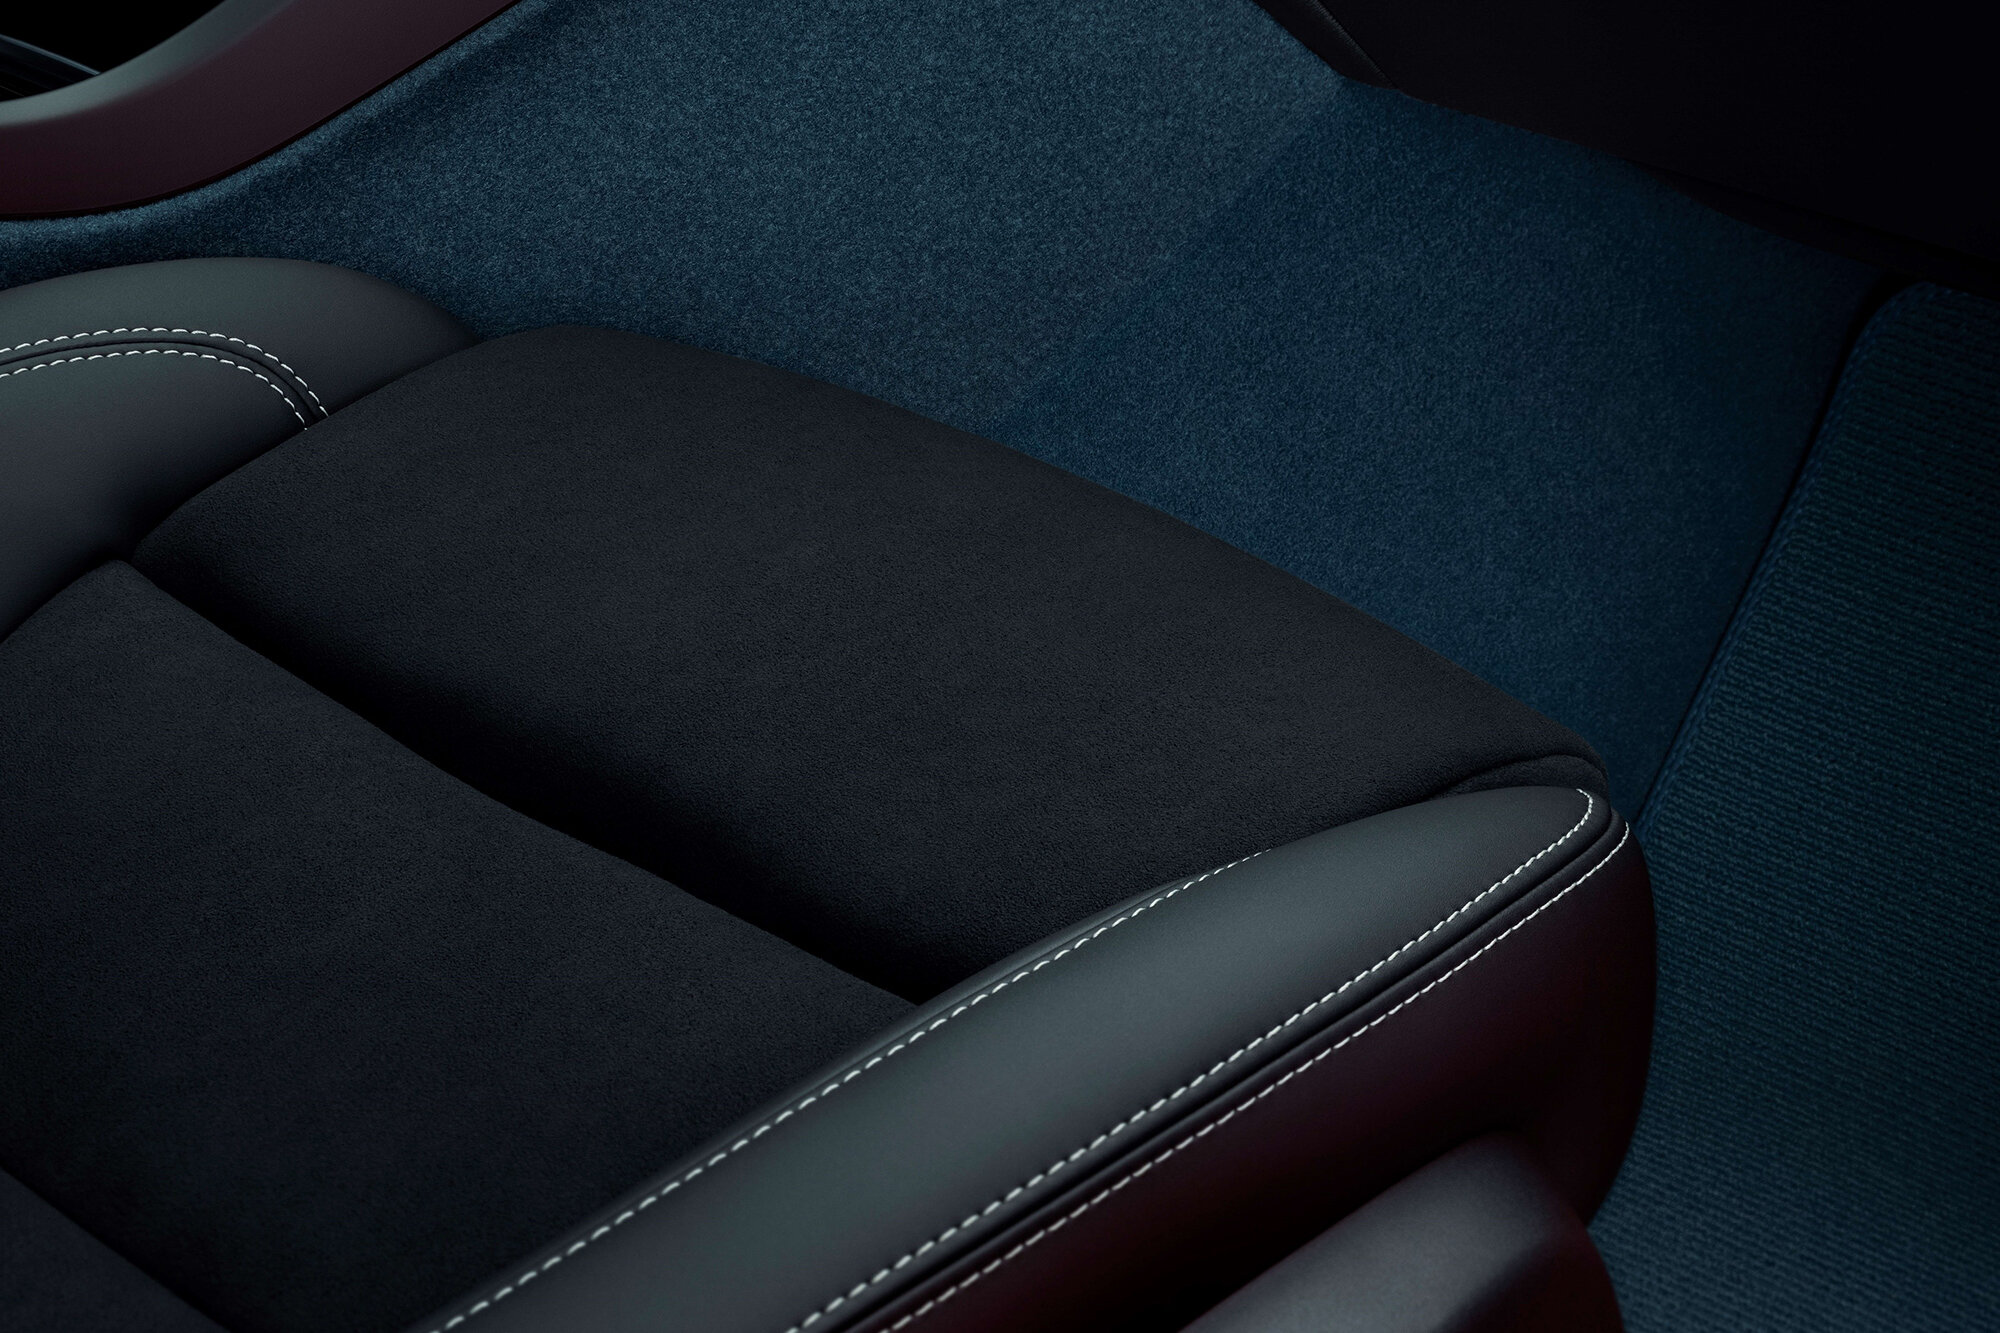 The interior of Volvos' new pure electric C40